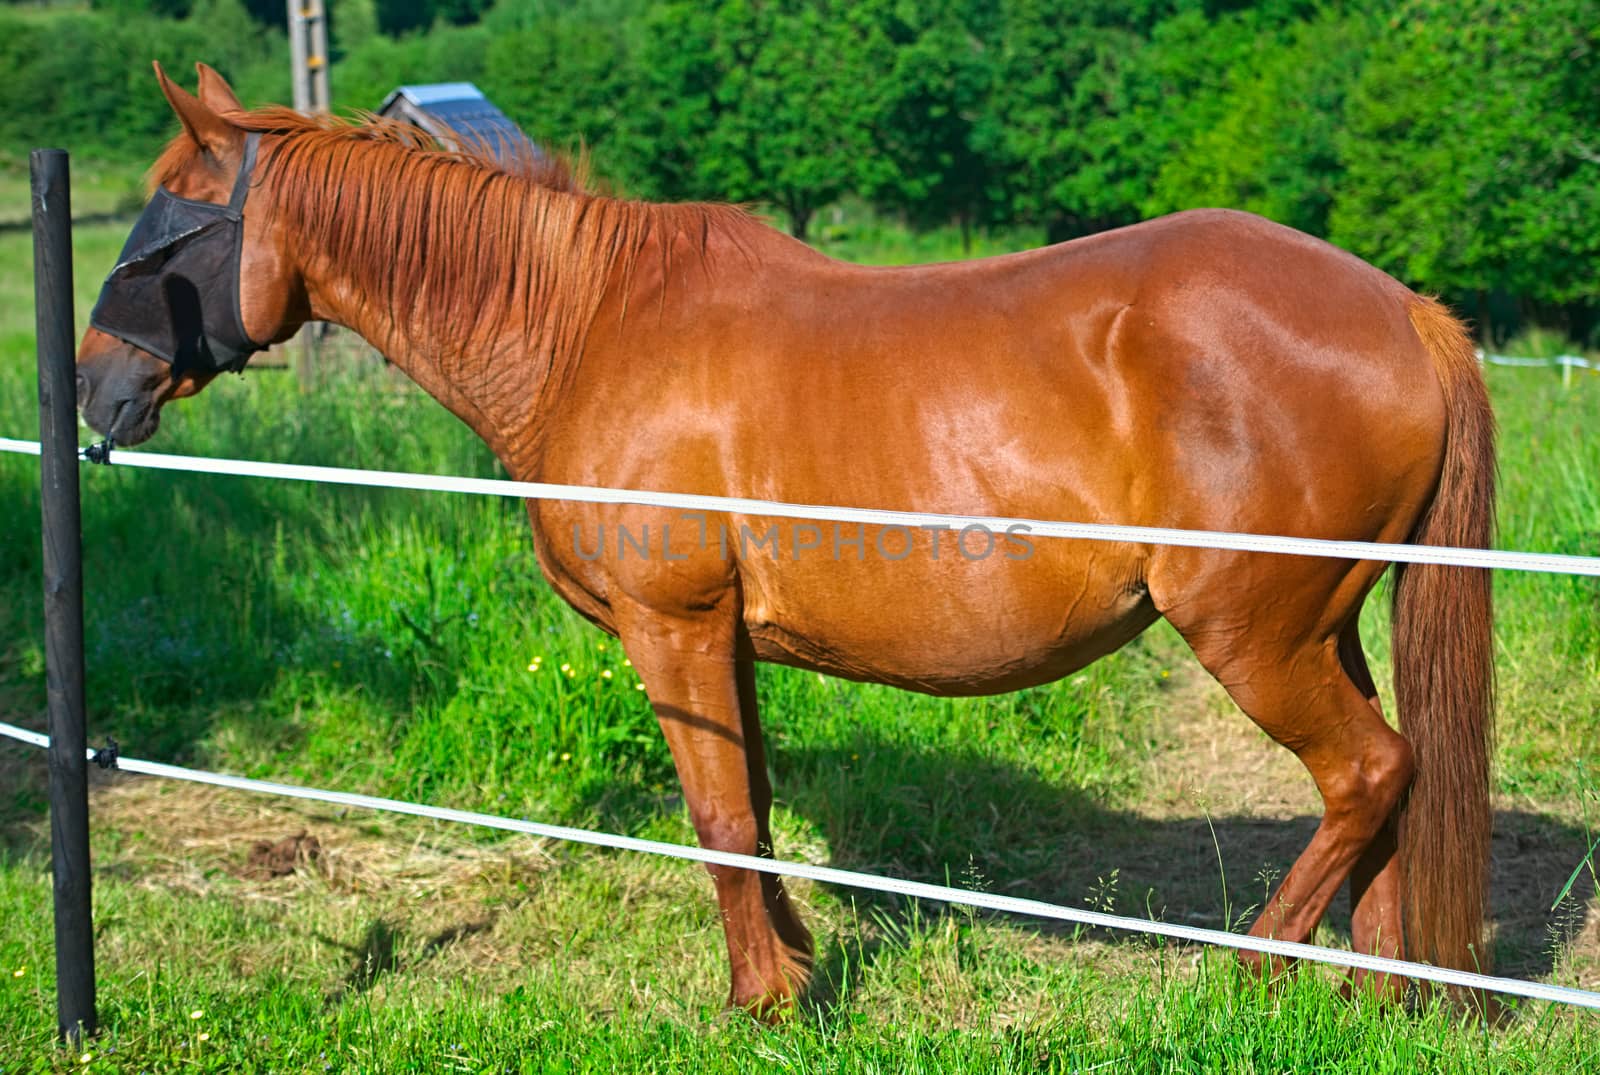 Brown horse with protection mask standing behind simple fence